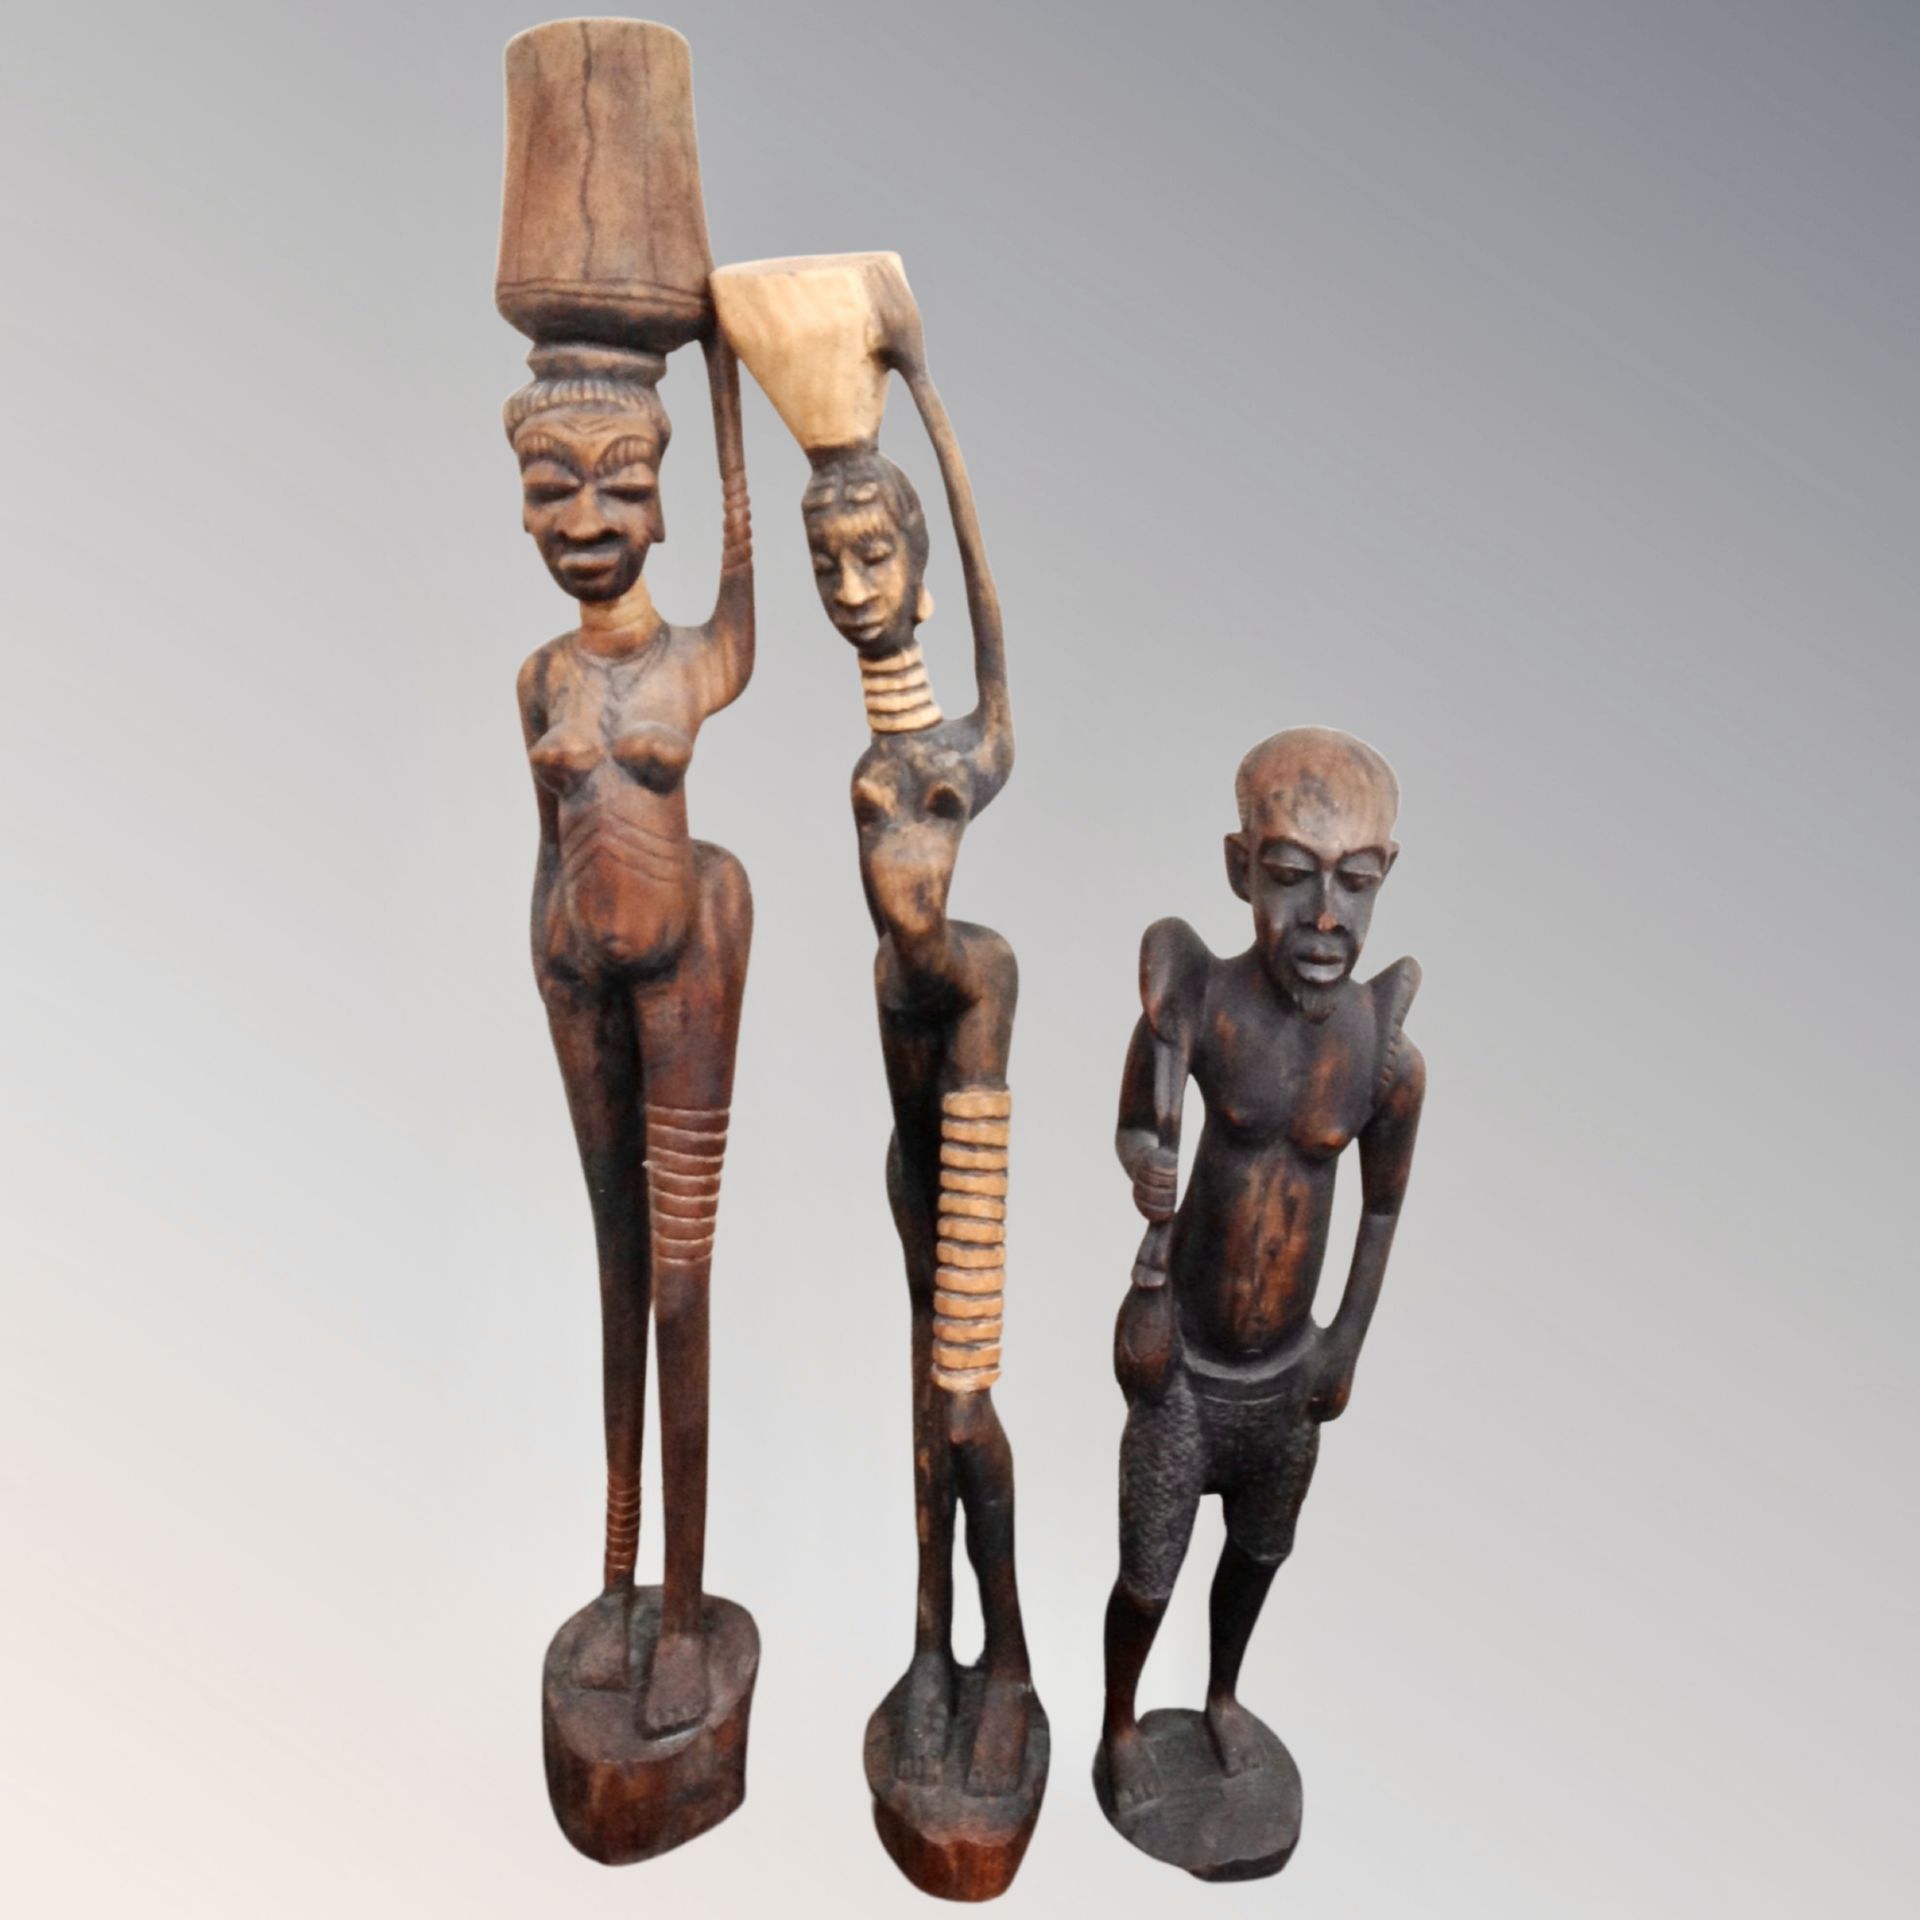 Three Gambian carved wooden figures